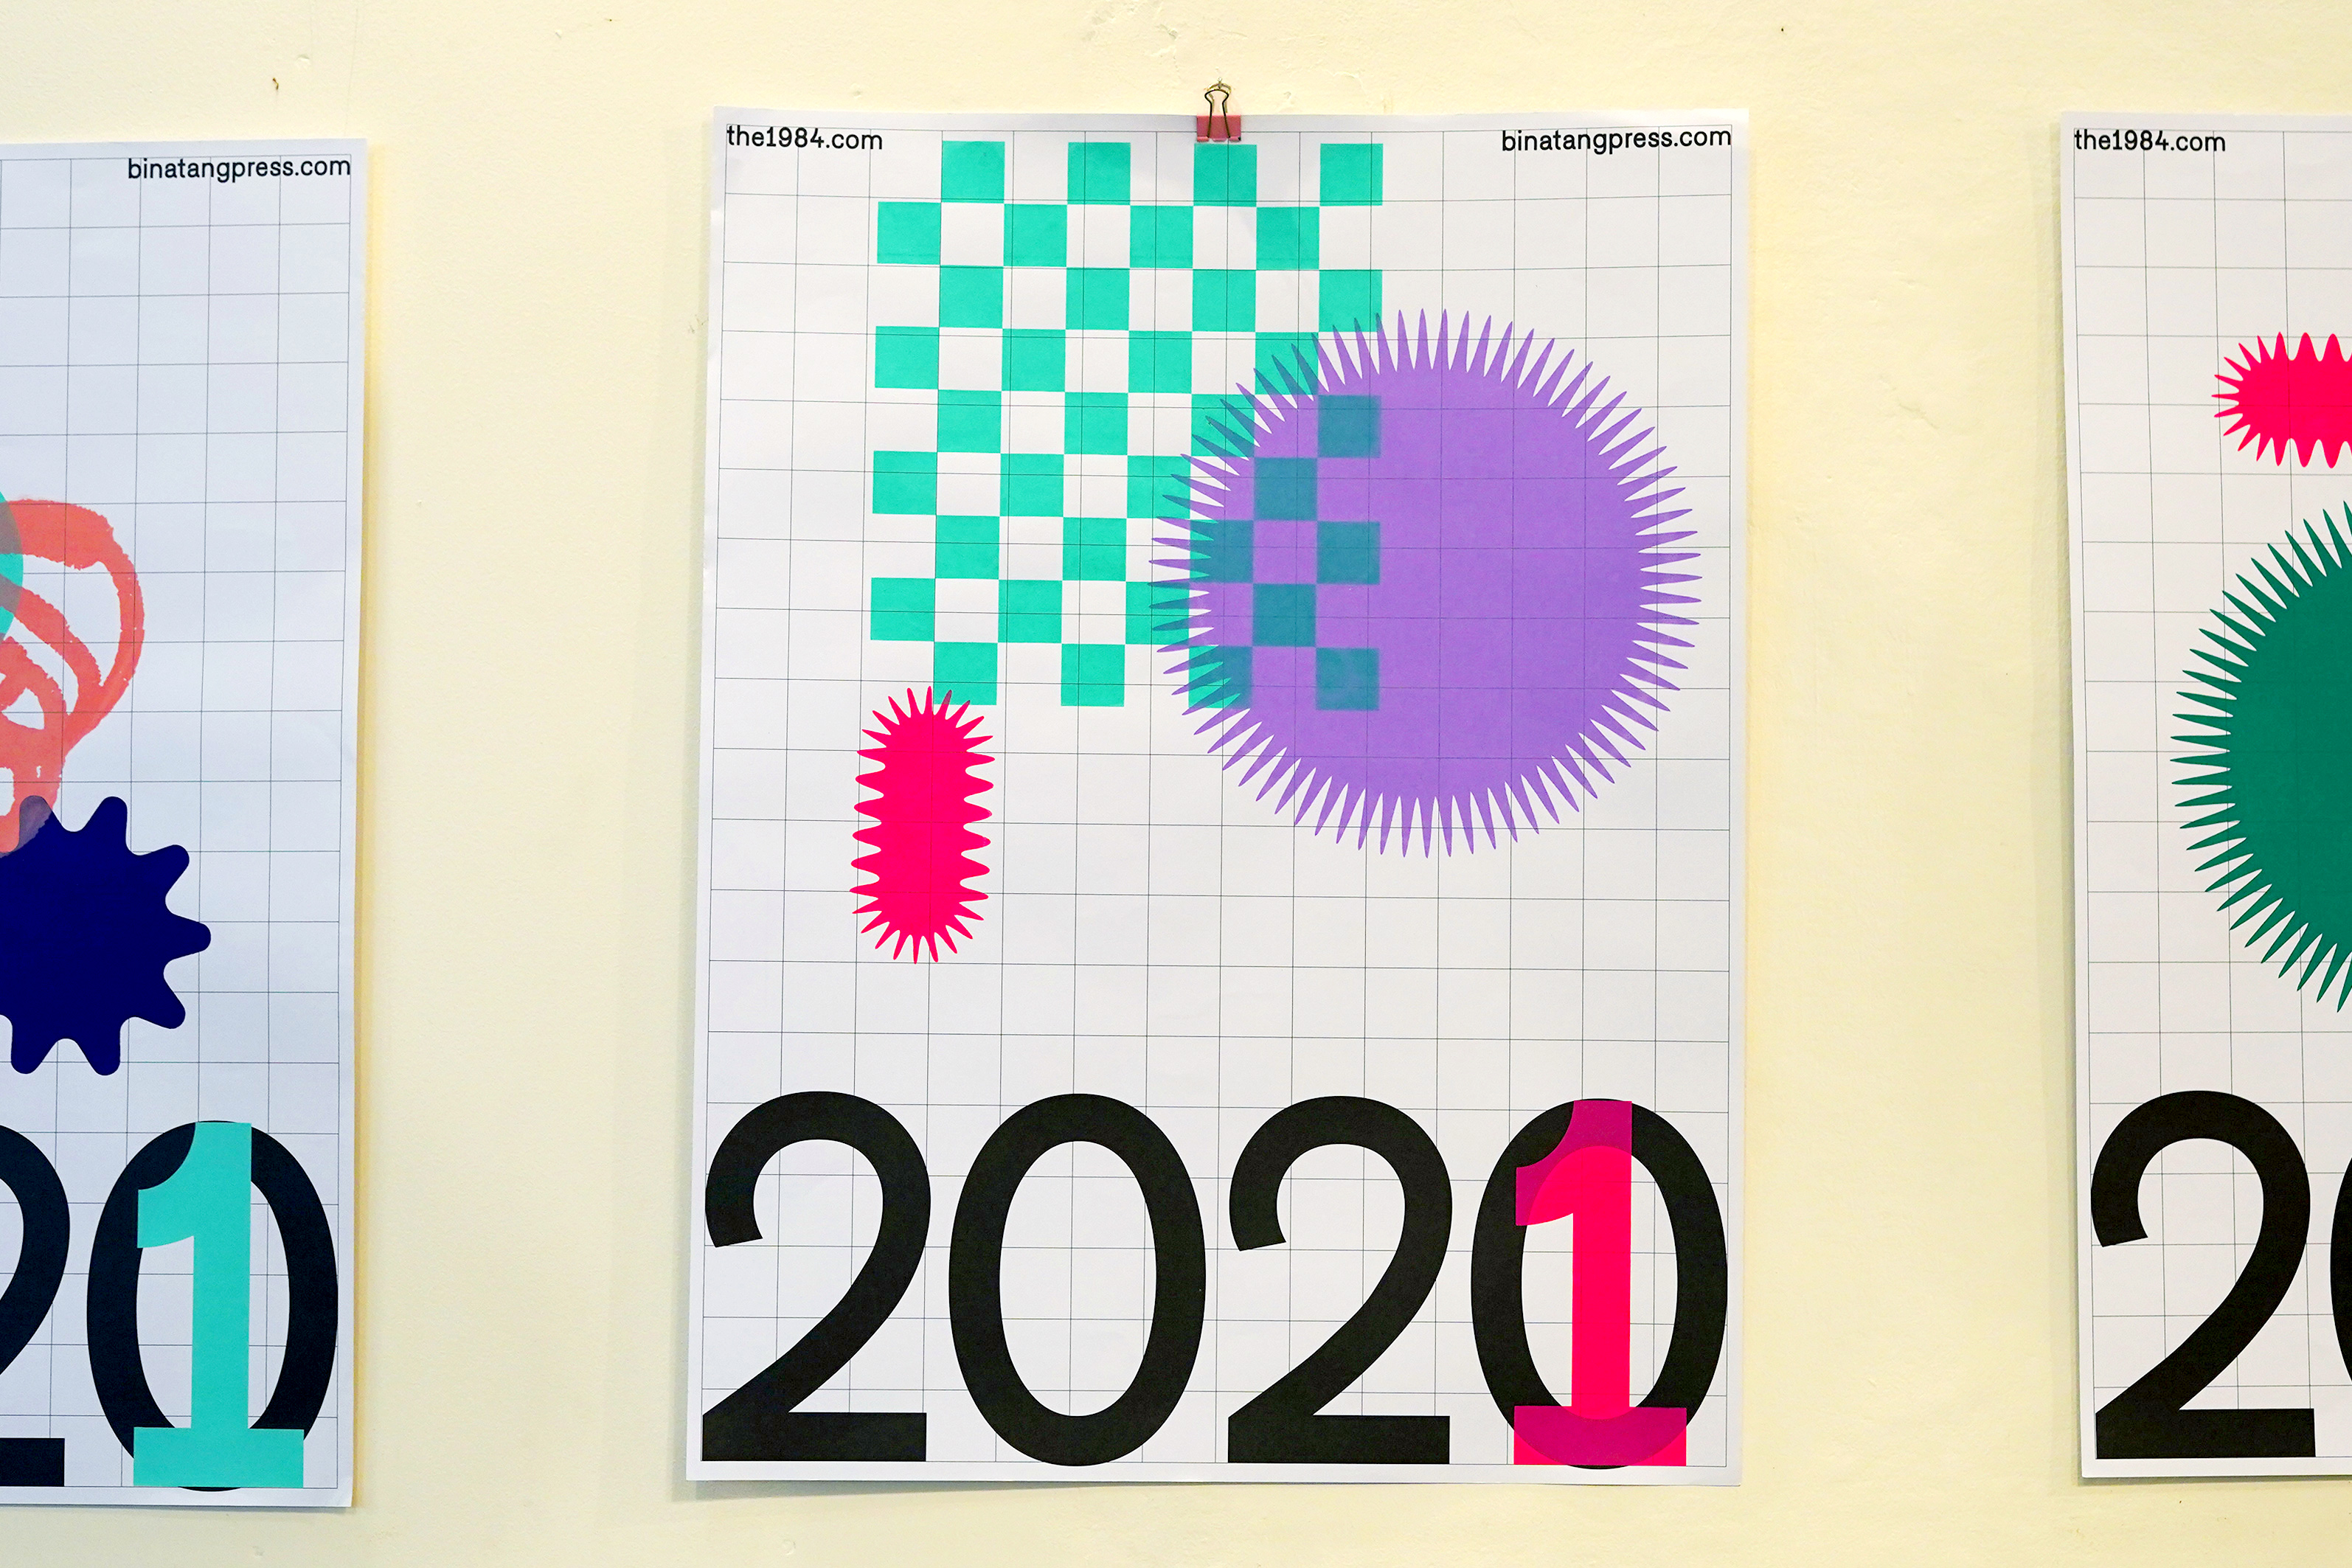 2020-21 Poster by The 1984 Jakarta